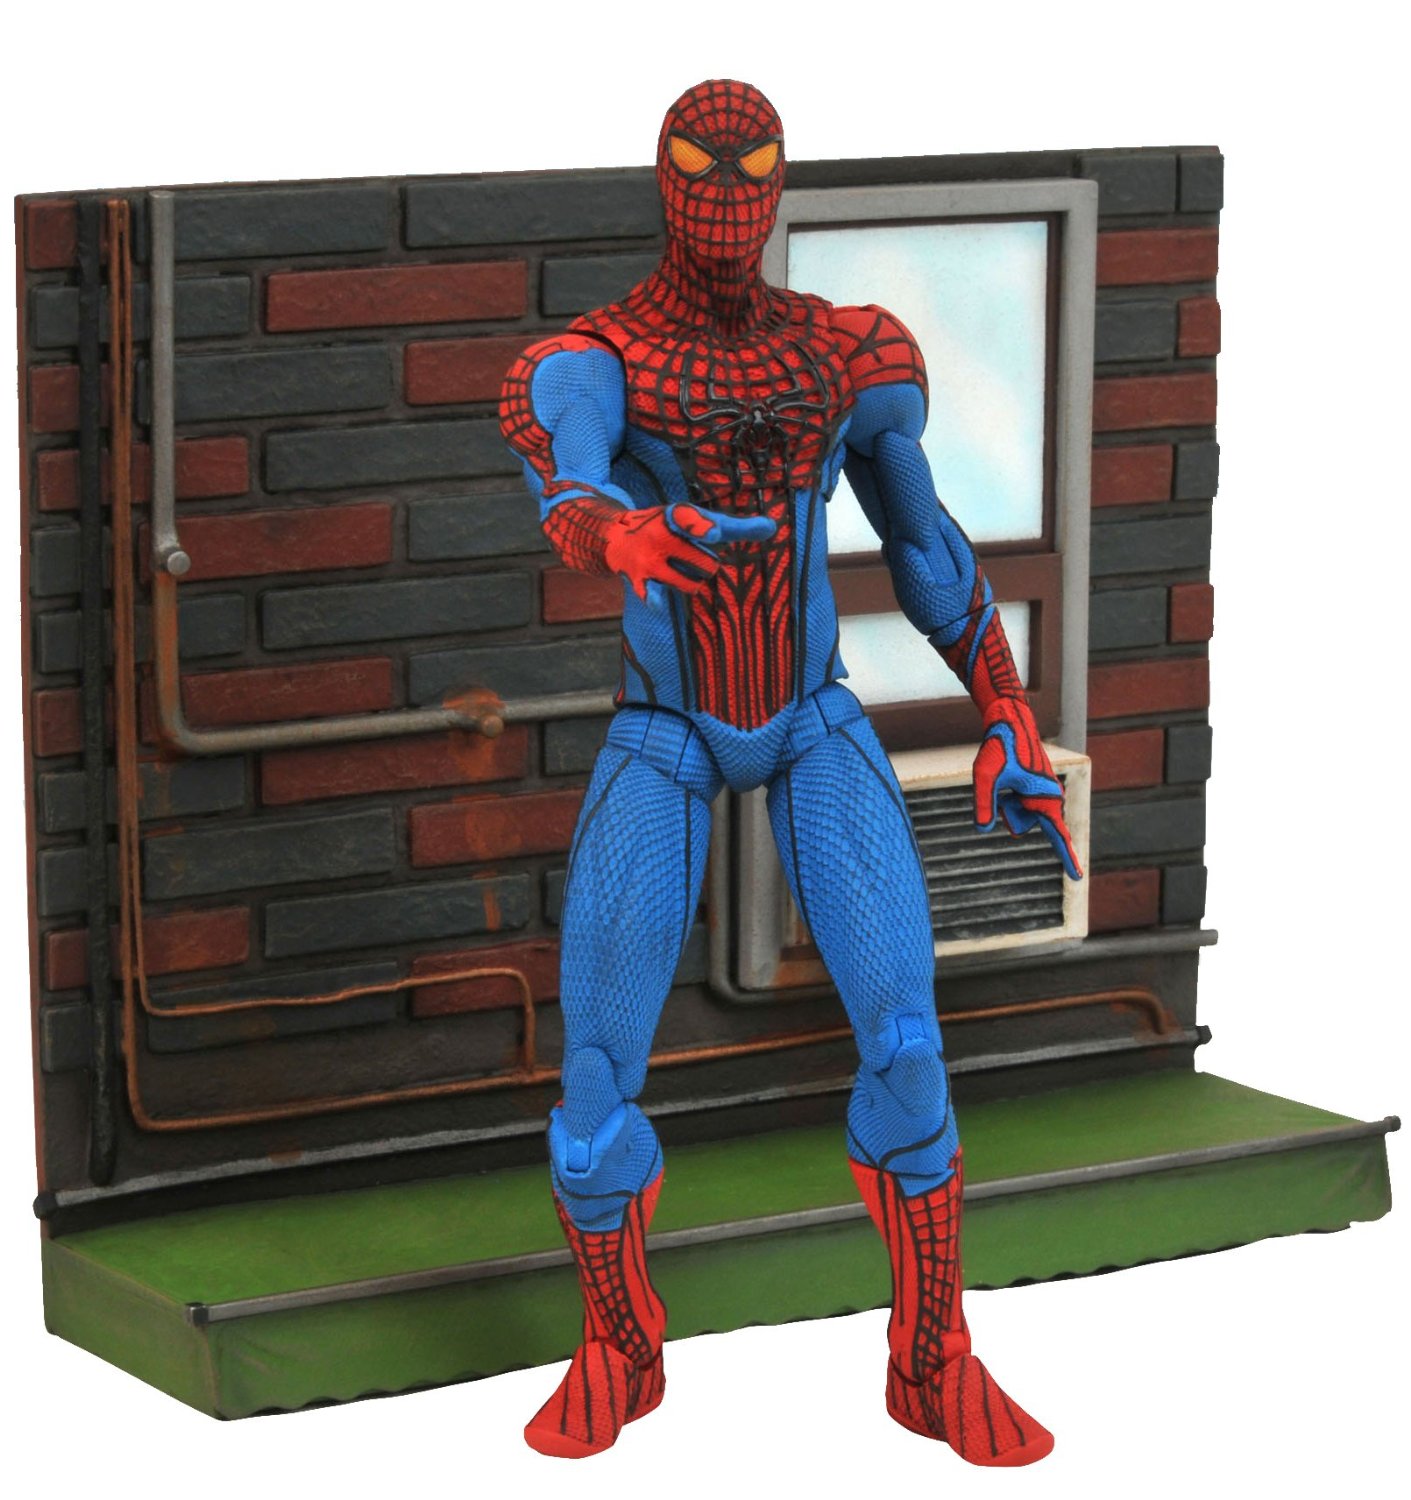 Marvel Select: The Amazing Spider-Man Action Figure | Funko Universe,  Planet of comics, games and collecting.